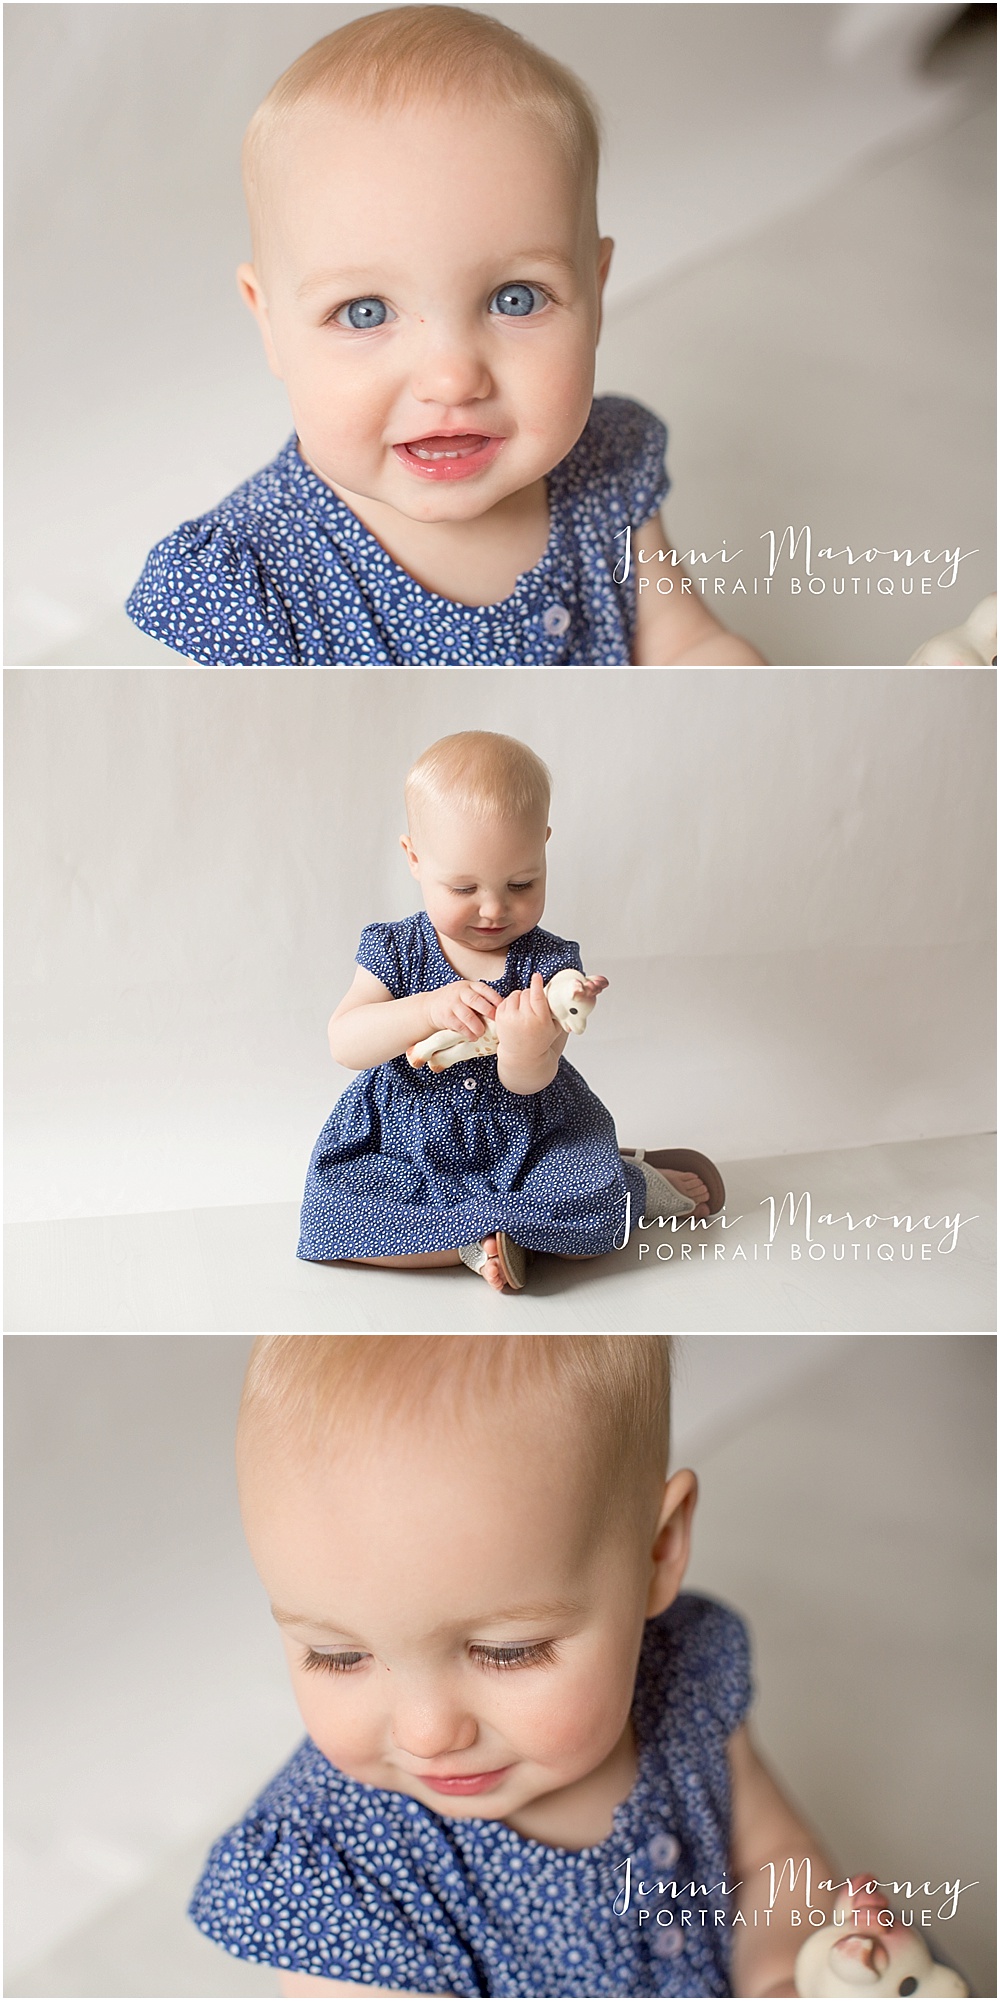 Denver newborn photographer captures one year photo session for baby girl with blue eyes